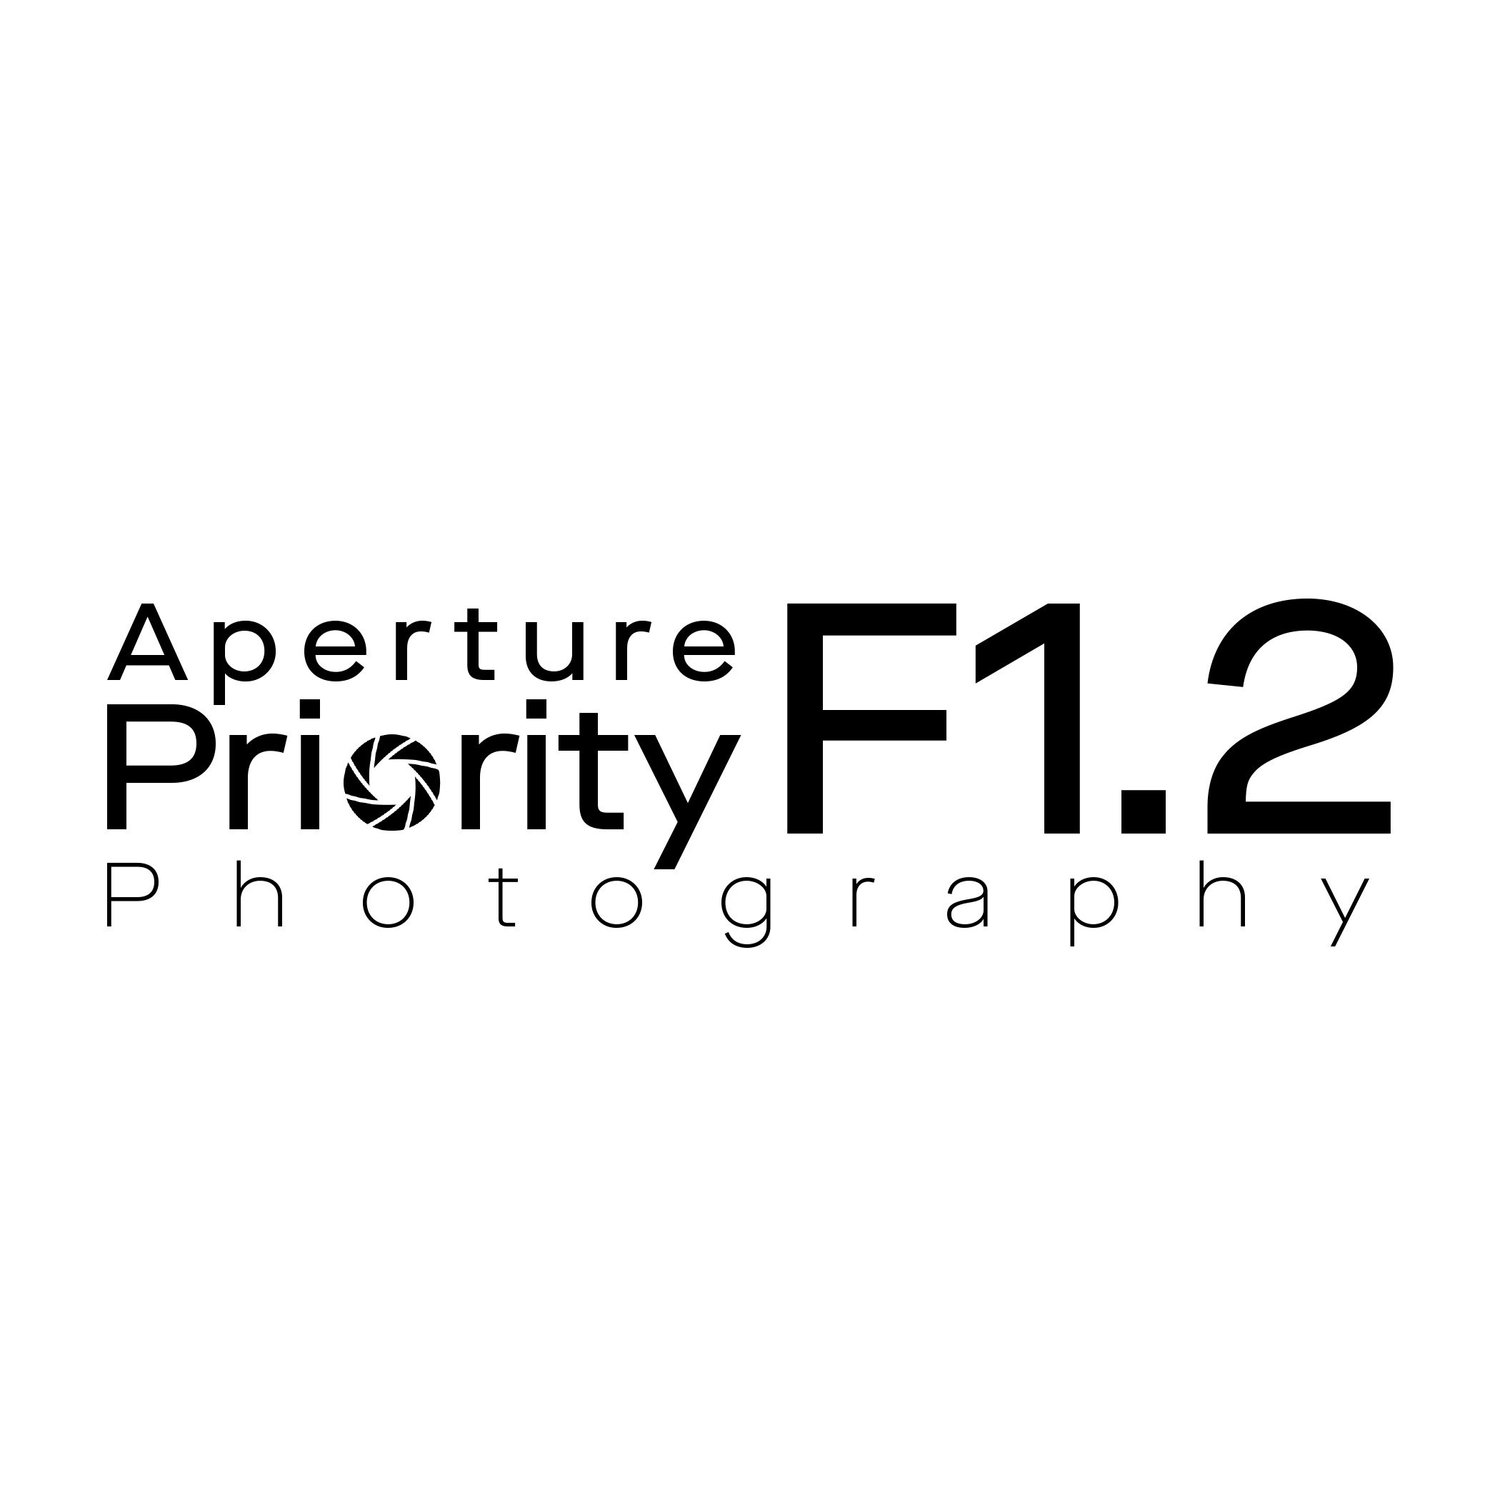 Aperture Priority F1.2 Photography